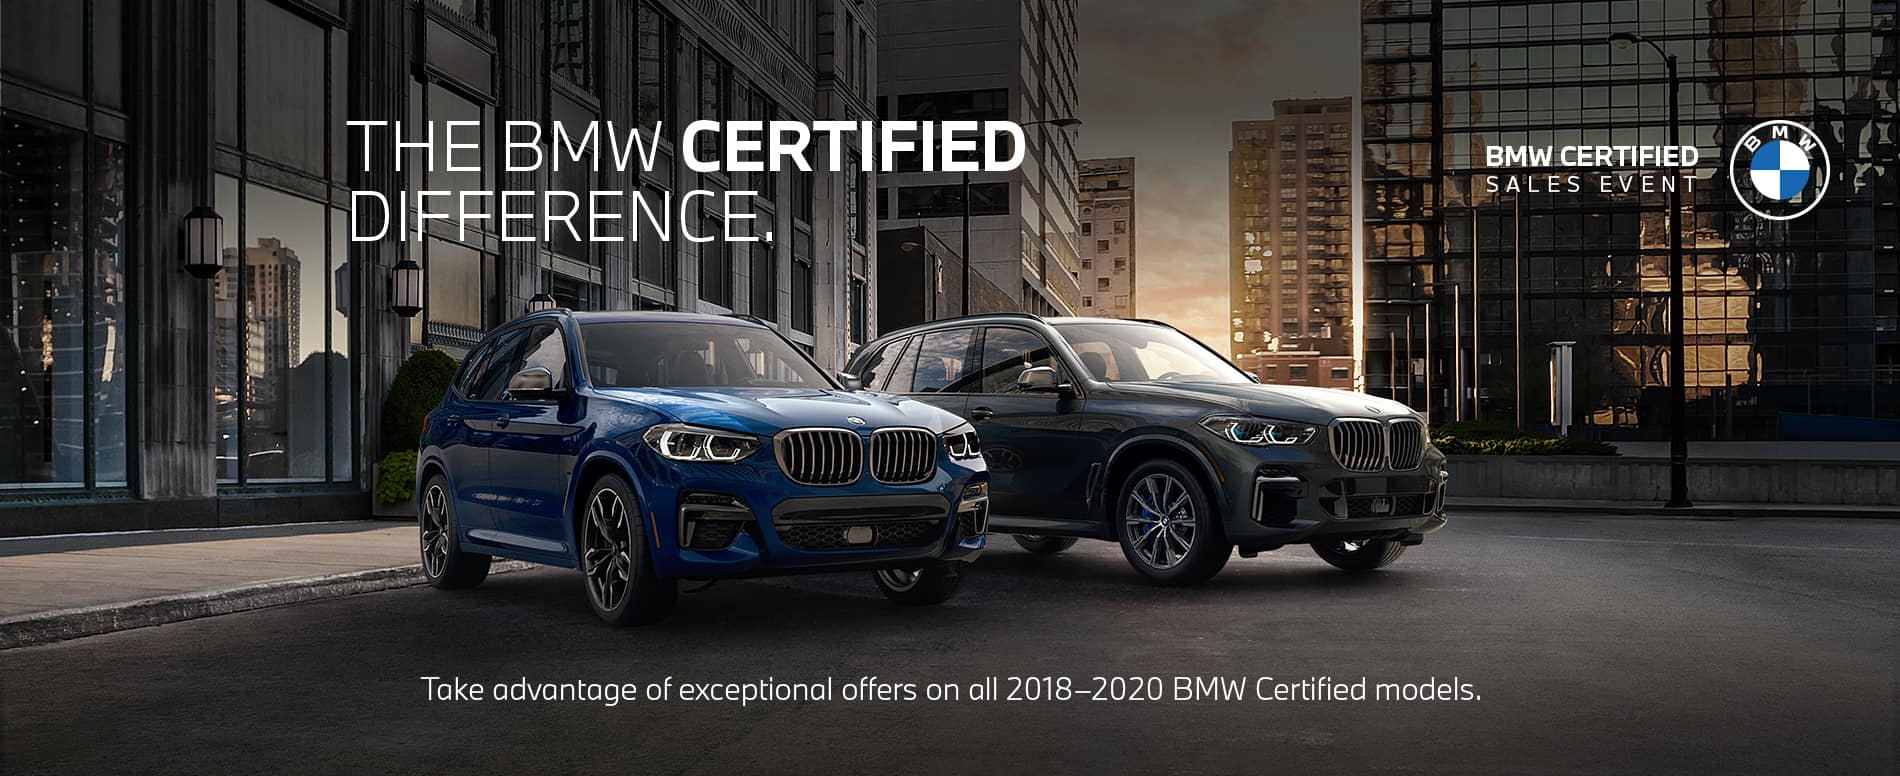 Bmw of cincinnati south cryptocurrency sell the bottom